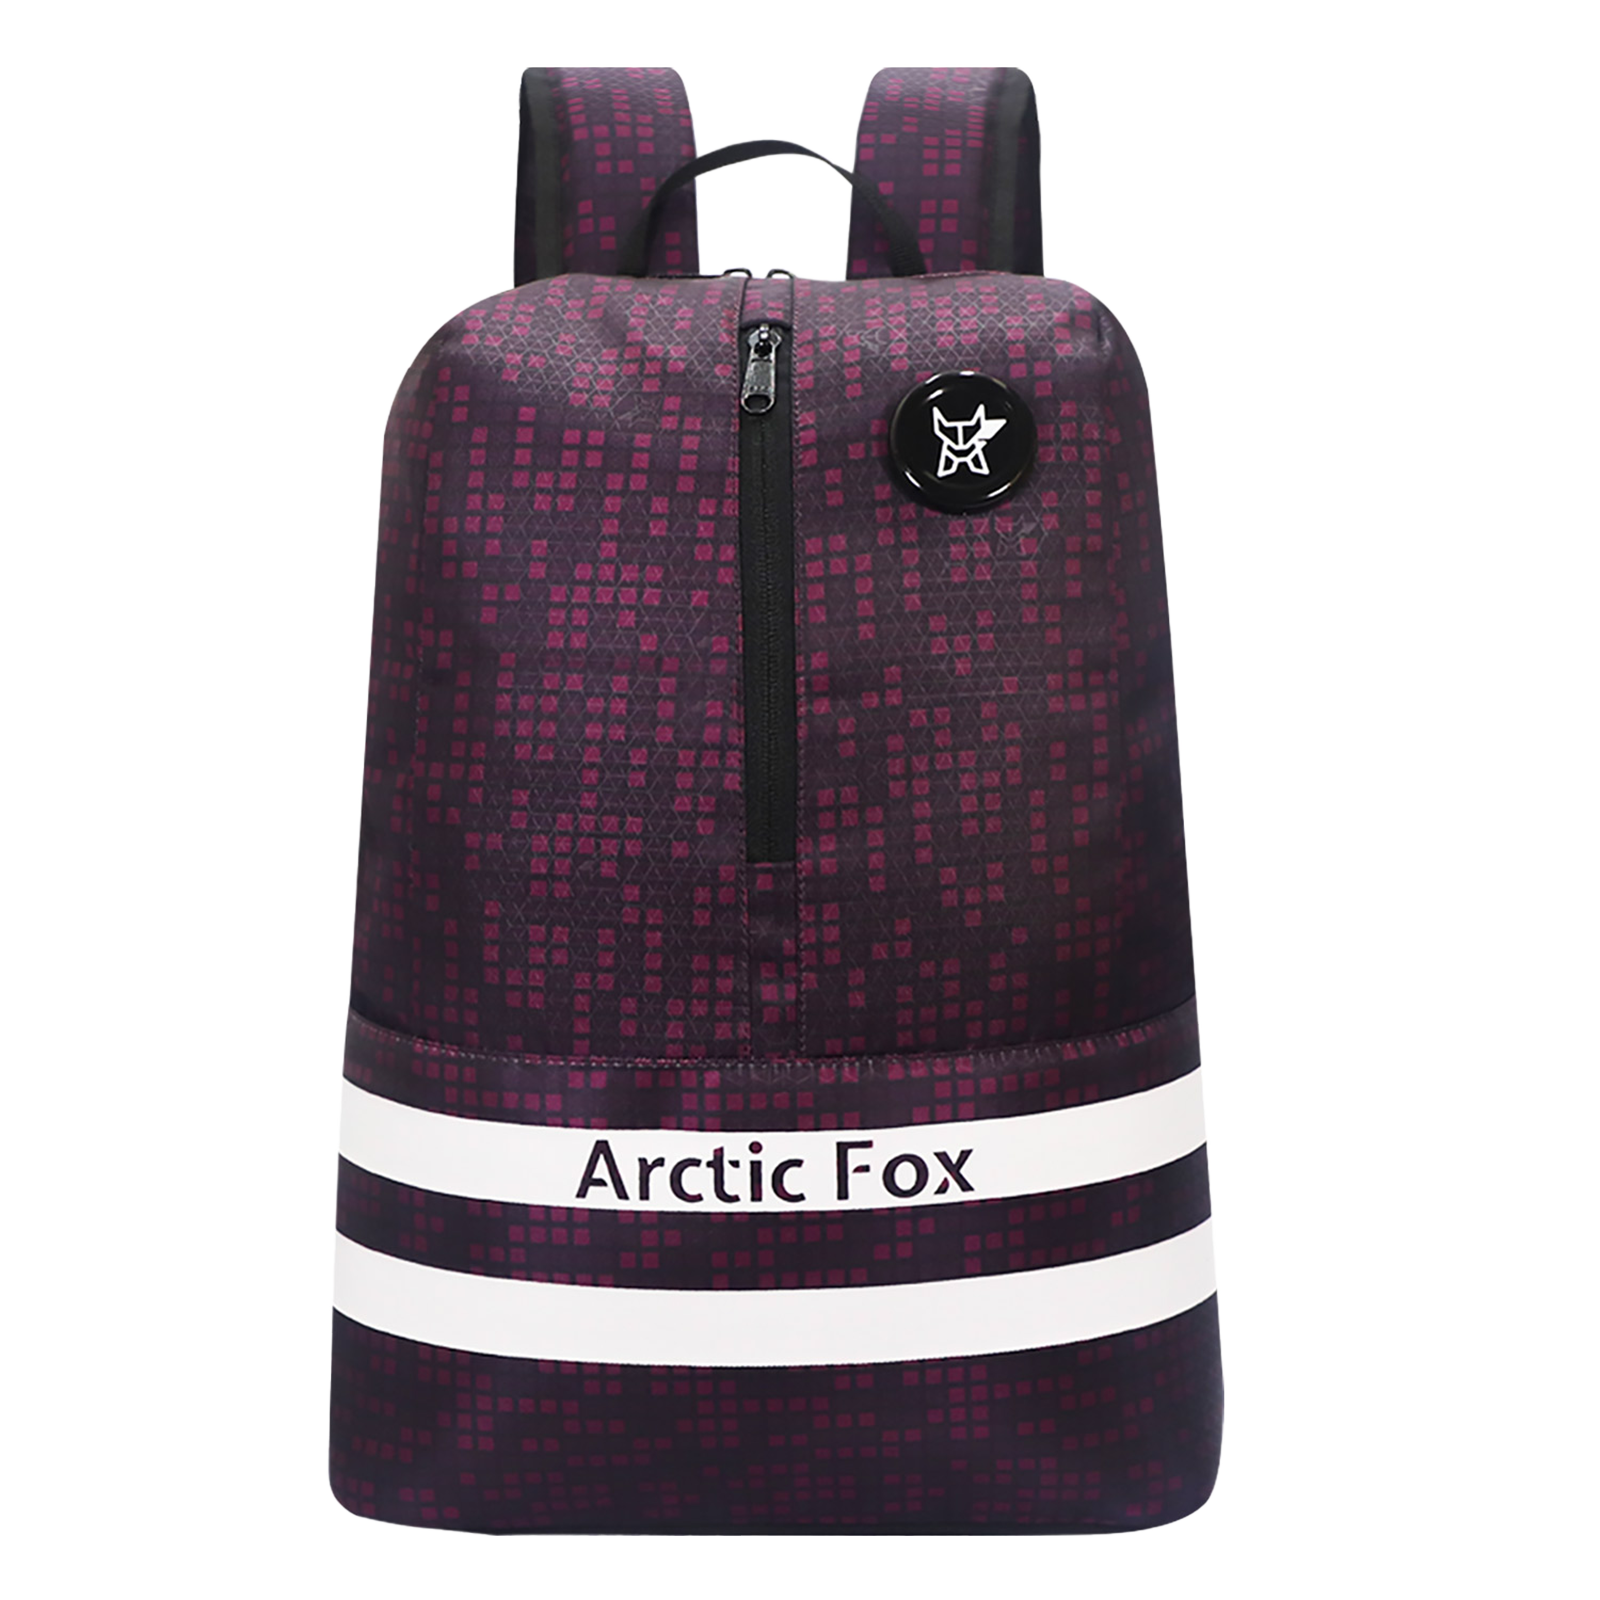 Arctic Fox Tuition 20 Litres PU Coated Polyester Backpack (1 Spacious Compartment, FTEBPKMARWZ028012, Maroon)_1